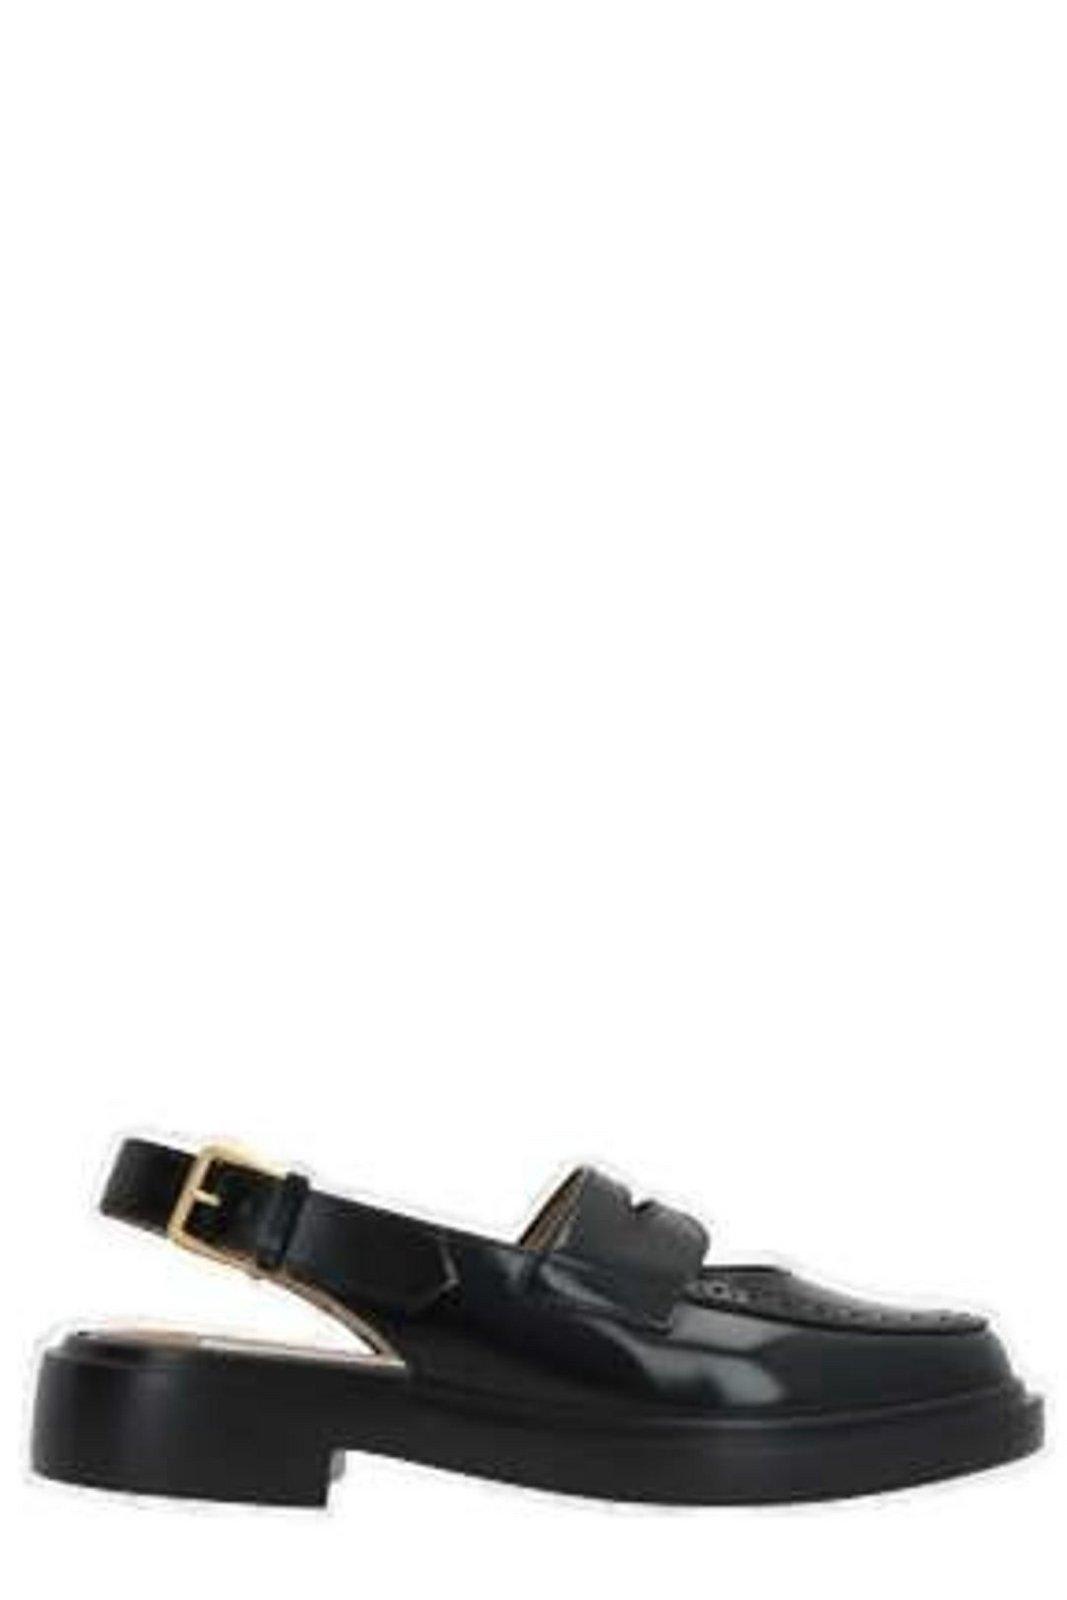 THOM BROWNE CUT OUT DETAILED SLINGBACK PENNY LOAFERS